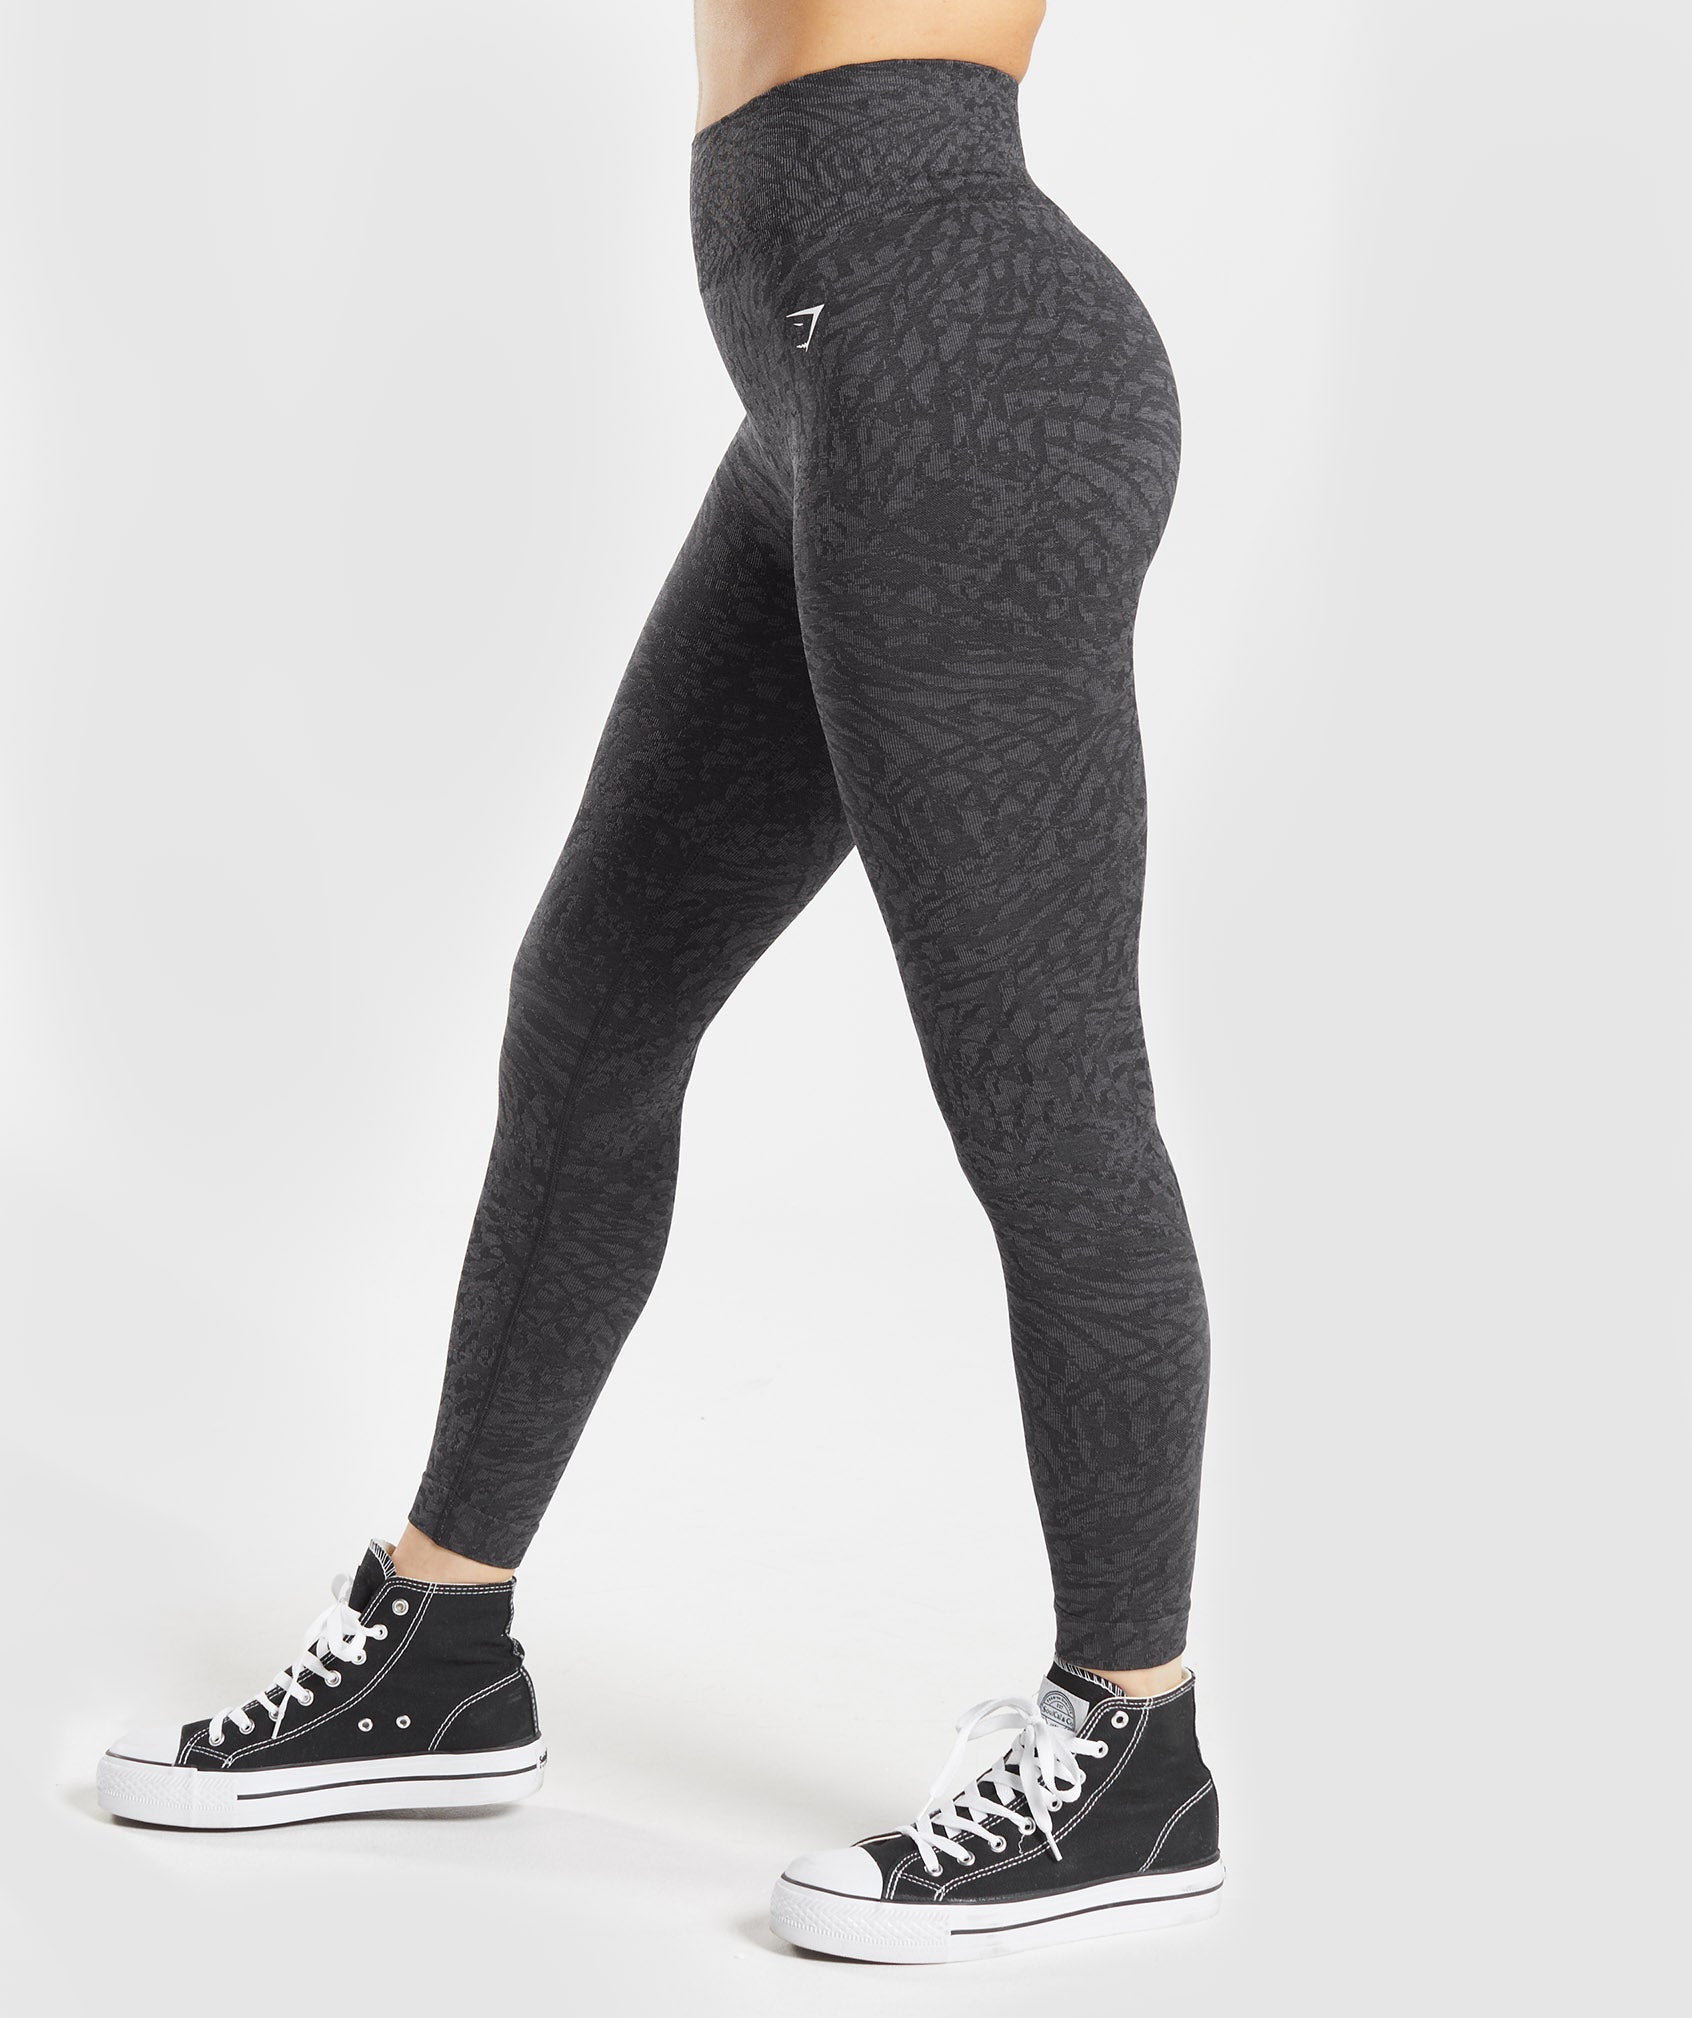 Gymshark ADAPT OMBRE SEAMLESS LEGGINGS Black Size M - $50 New With